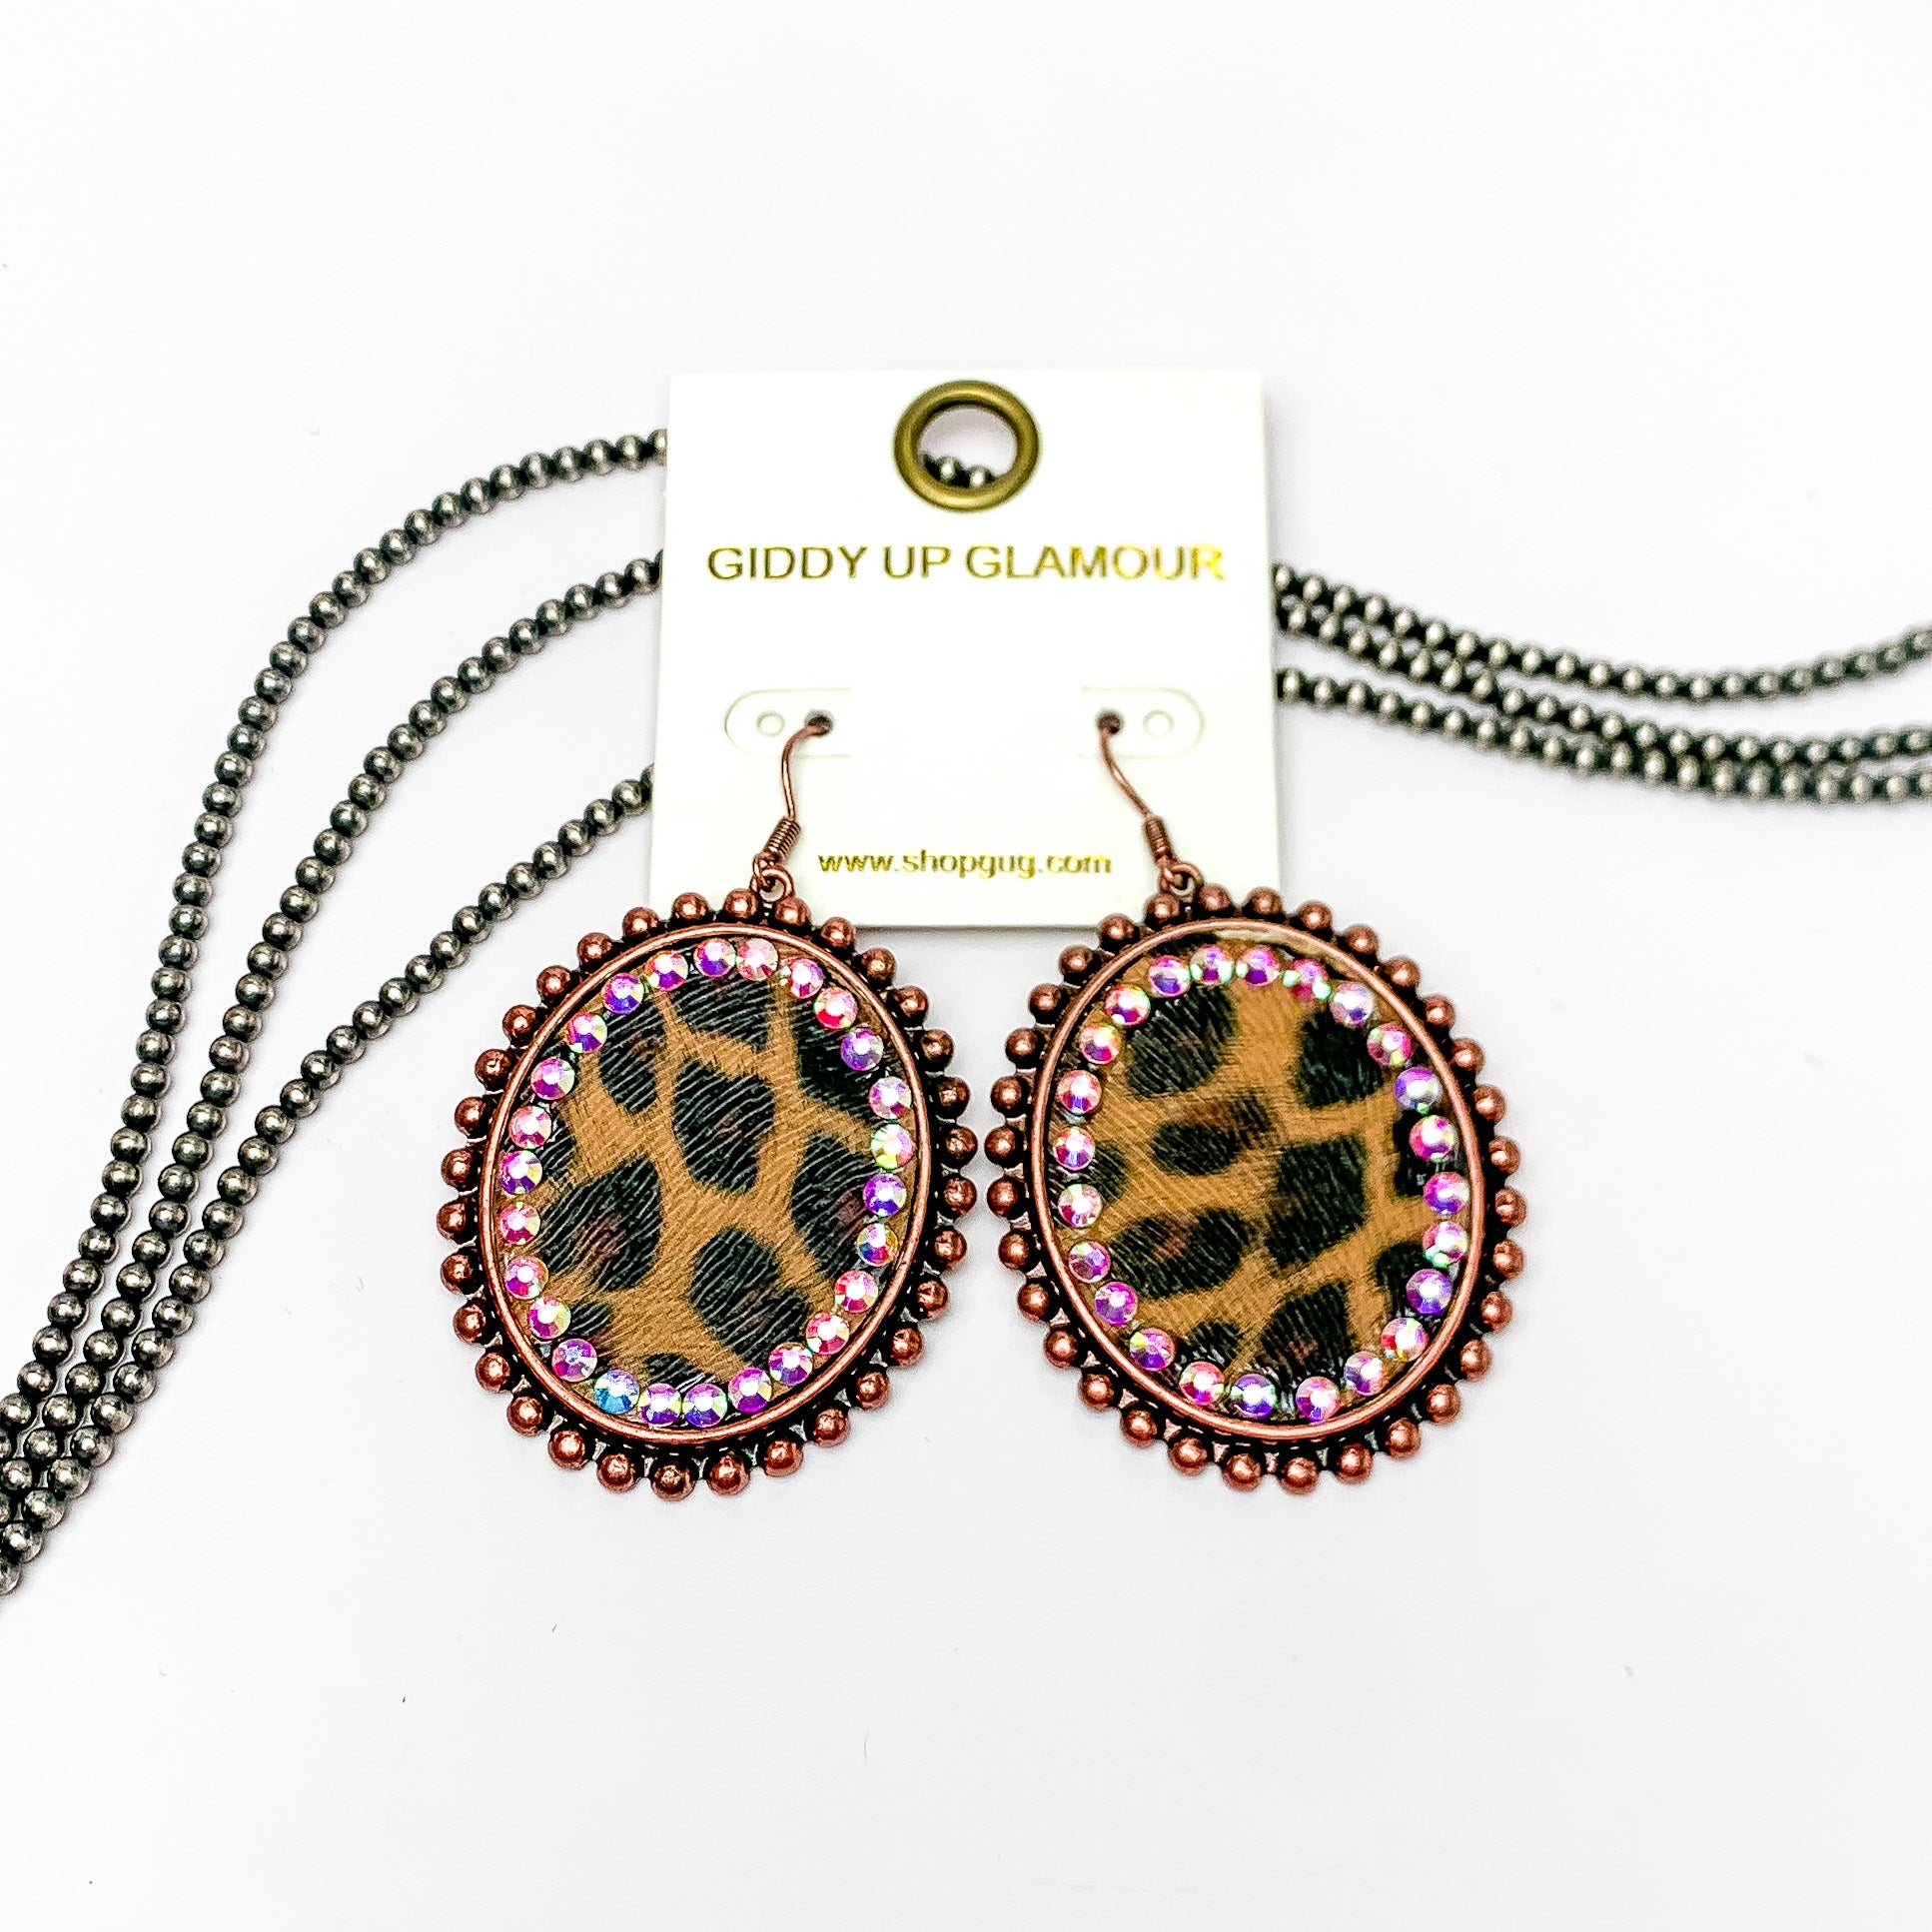 These earrings are oval shaped with leopard print inlay with the outline of the earring is copper but also has ab crystal going around the oval shape. These pair of earrings are pictured on a white background with navajo pearls behind it.